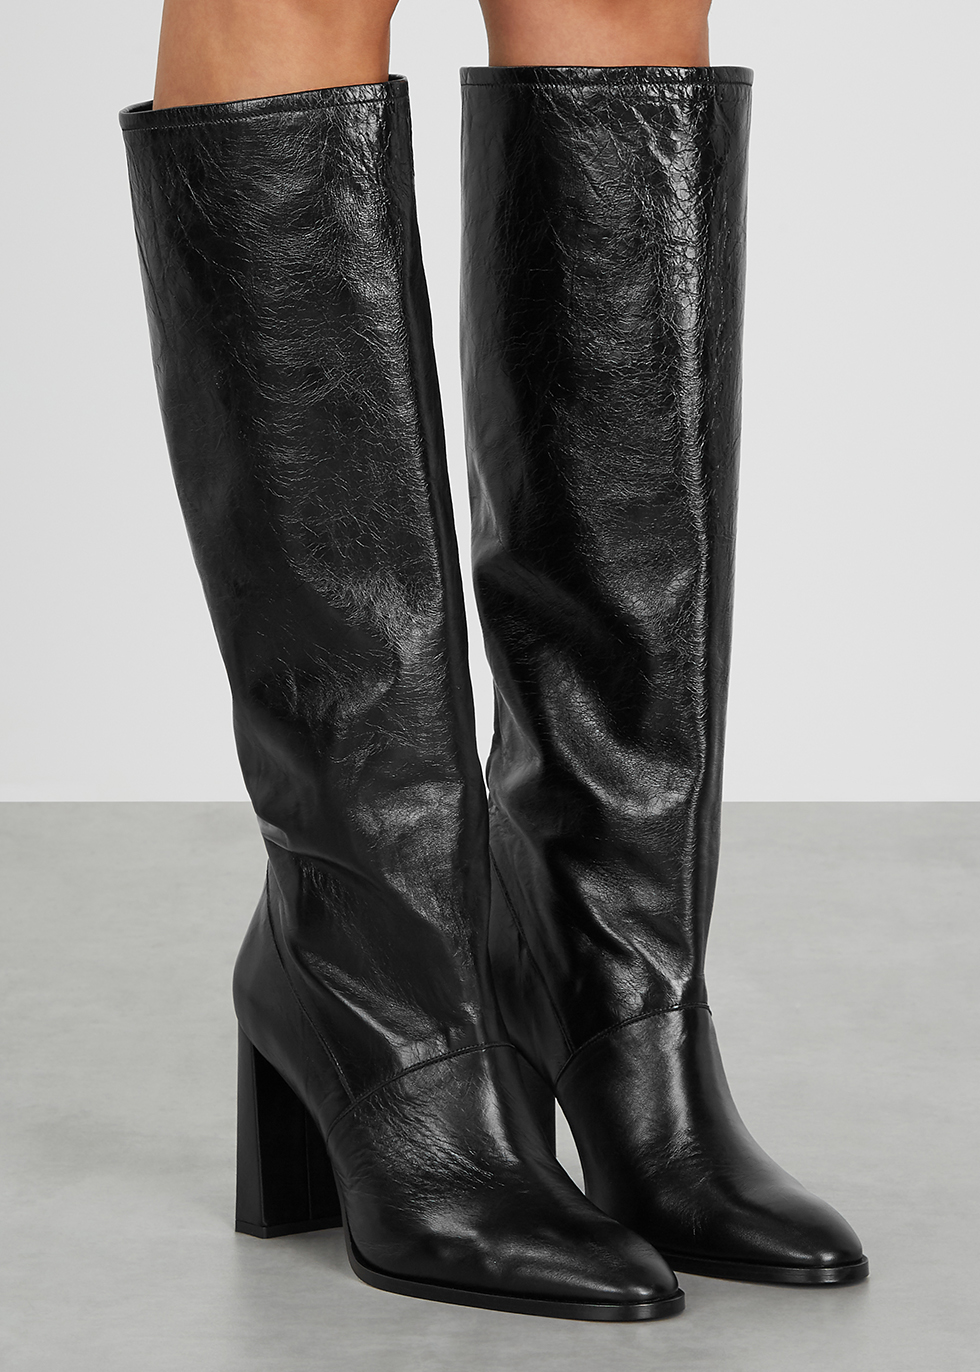 non leather knee high boots